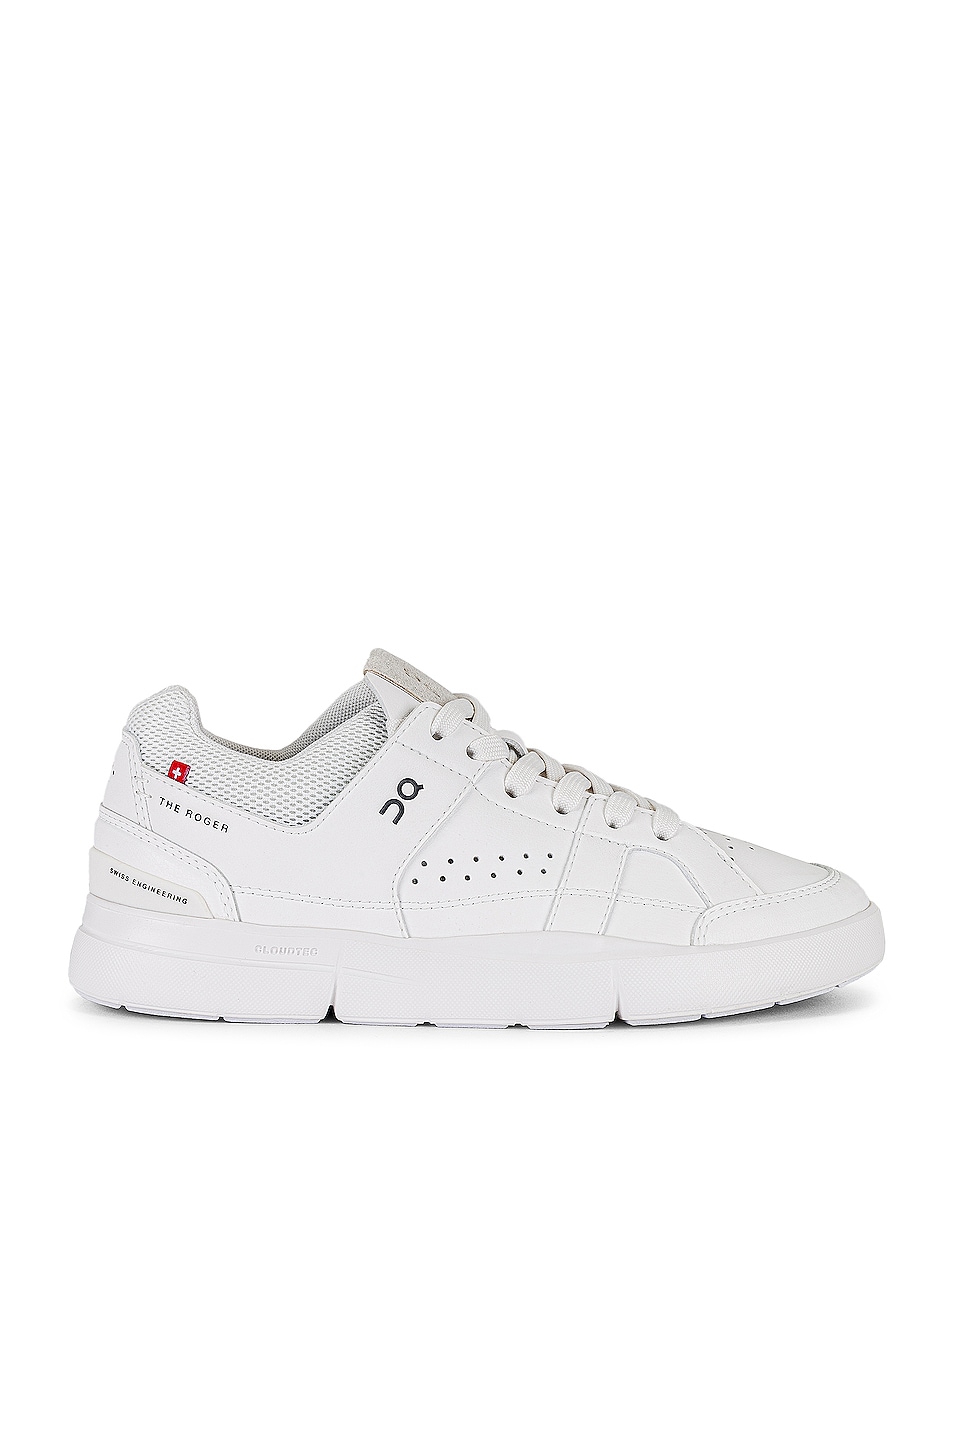 Image 1 of On The Roger Clubhouse Sneaker in All White